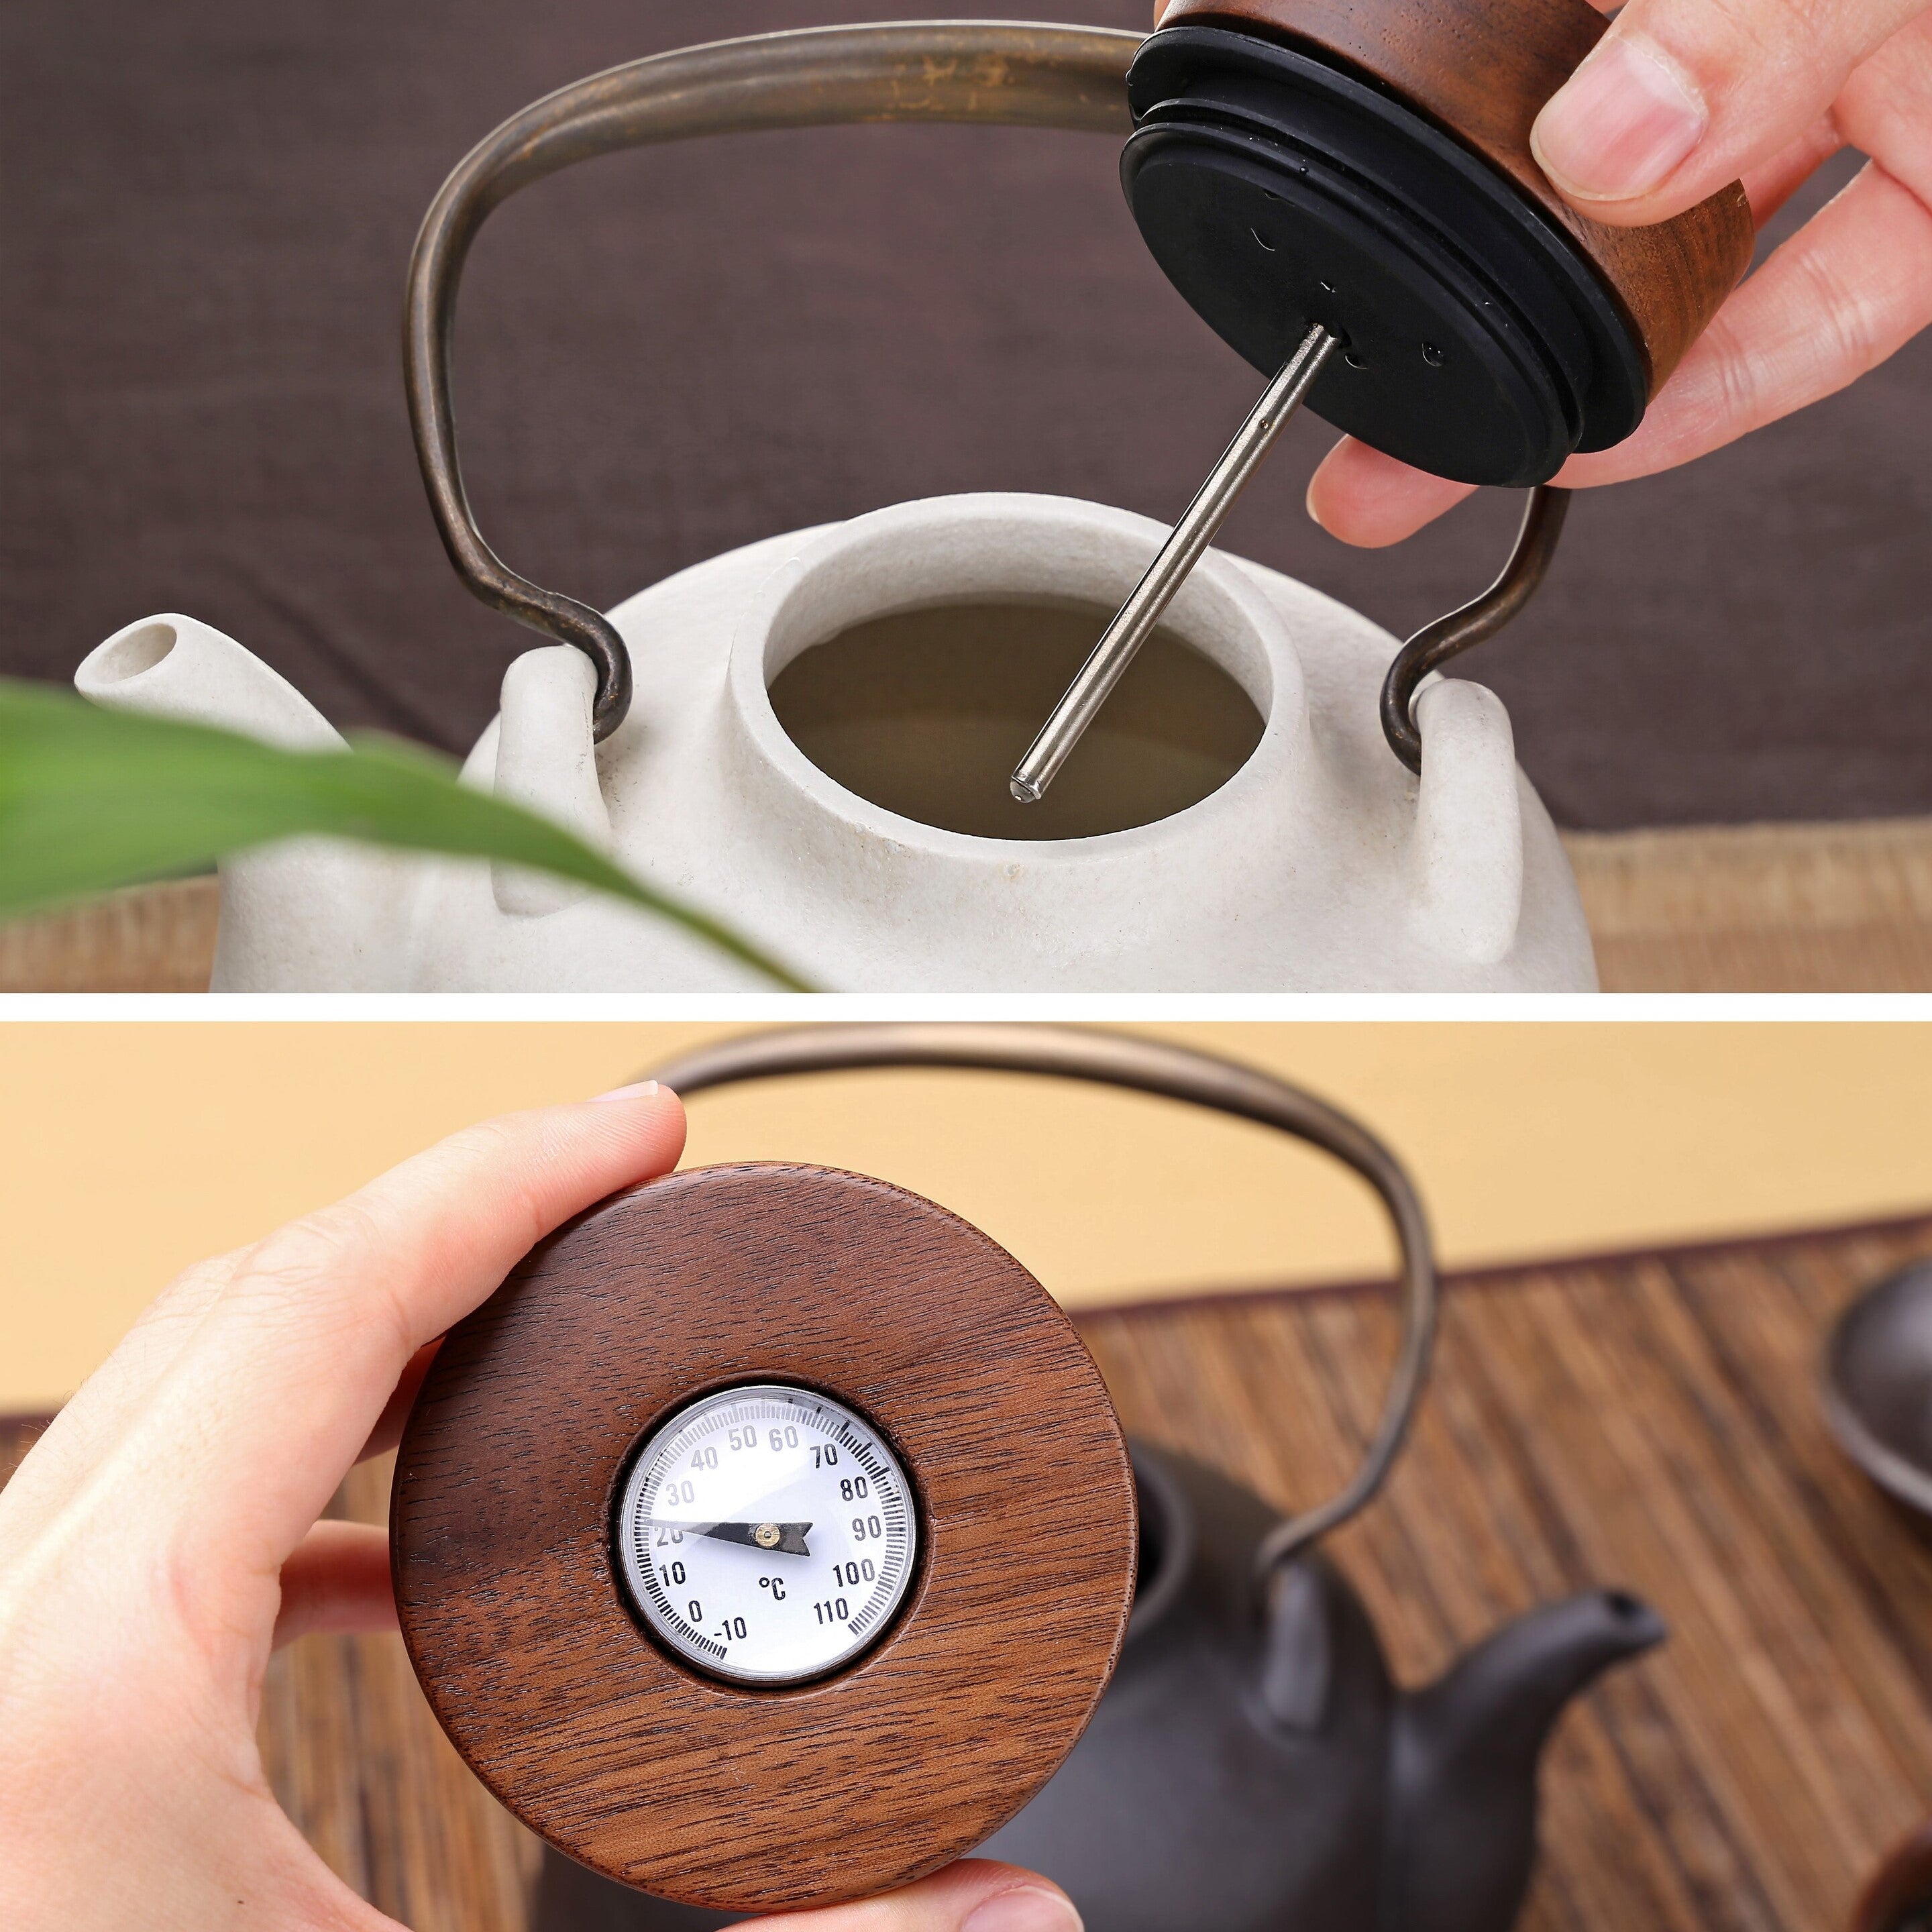 Ceramic Kettle - Crescent Spring Kettle with thermometer 1.1L